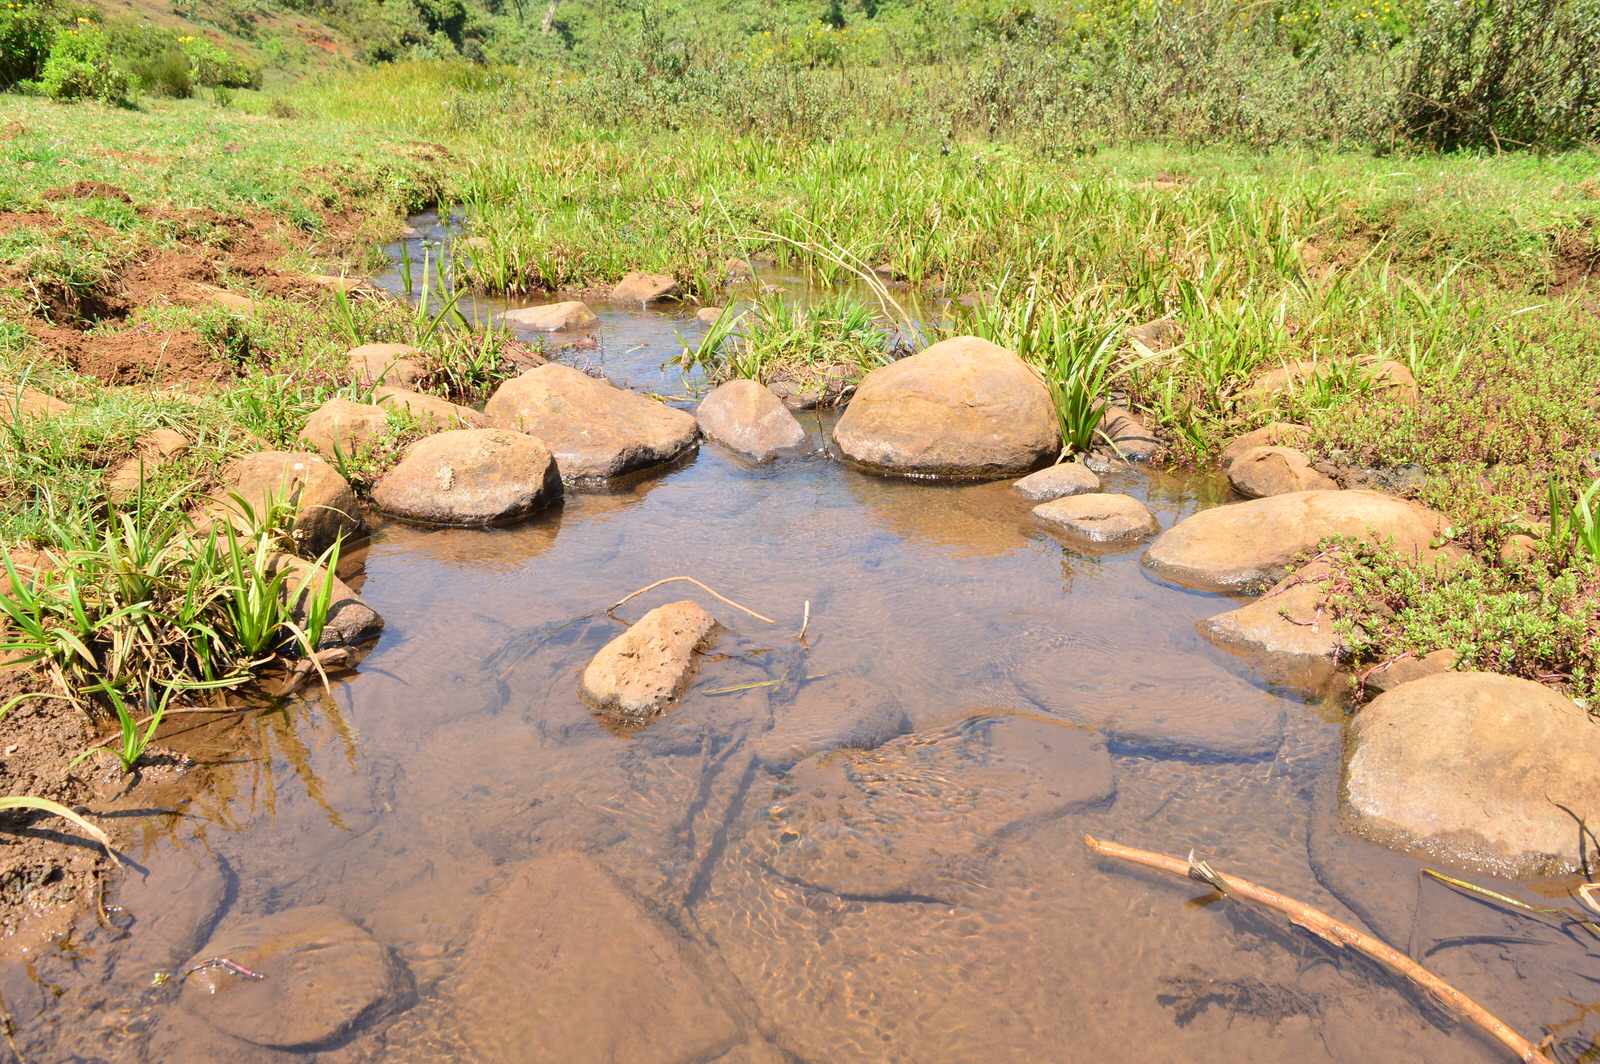 Mt. Kenya Forest is a source of many streams which join and flow into major rivers